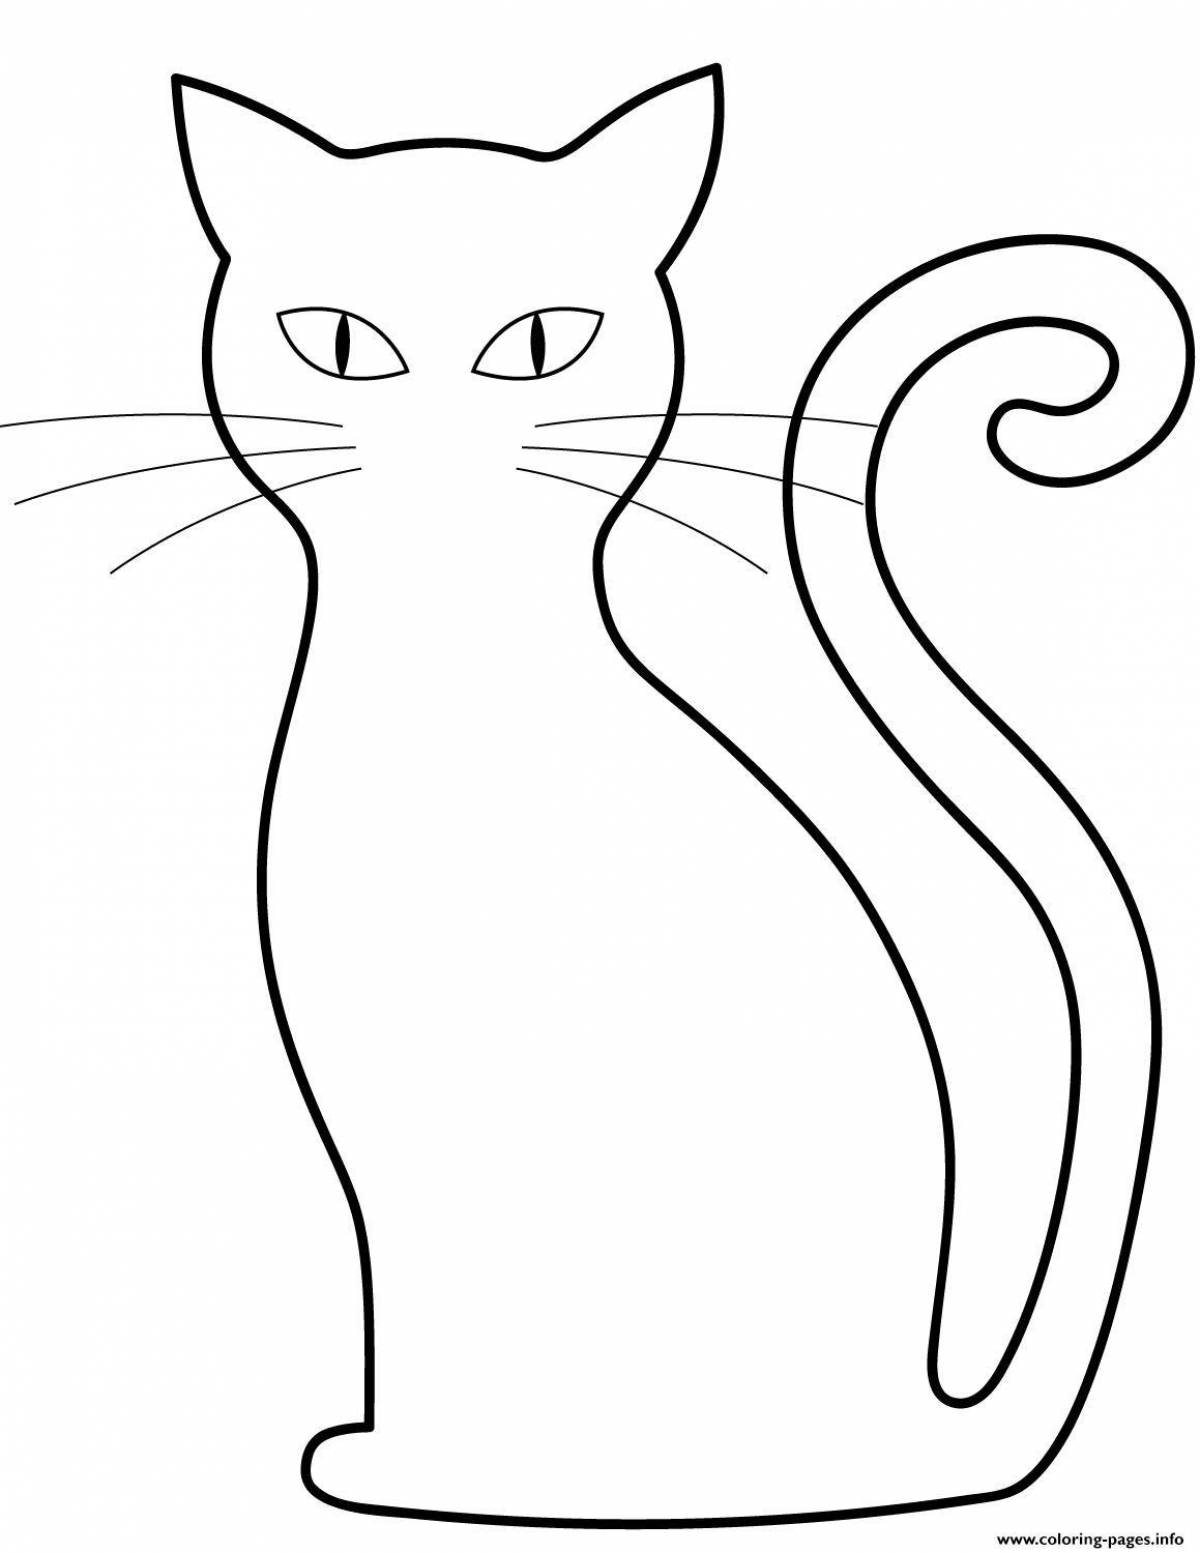 Colouring awesome cat silhouette